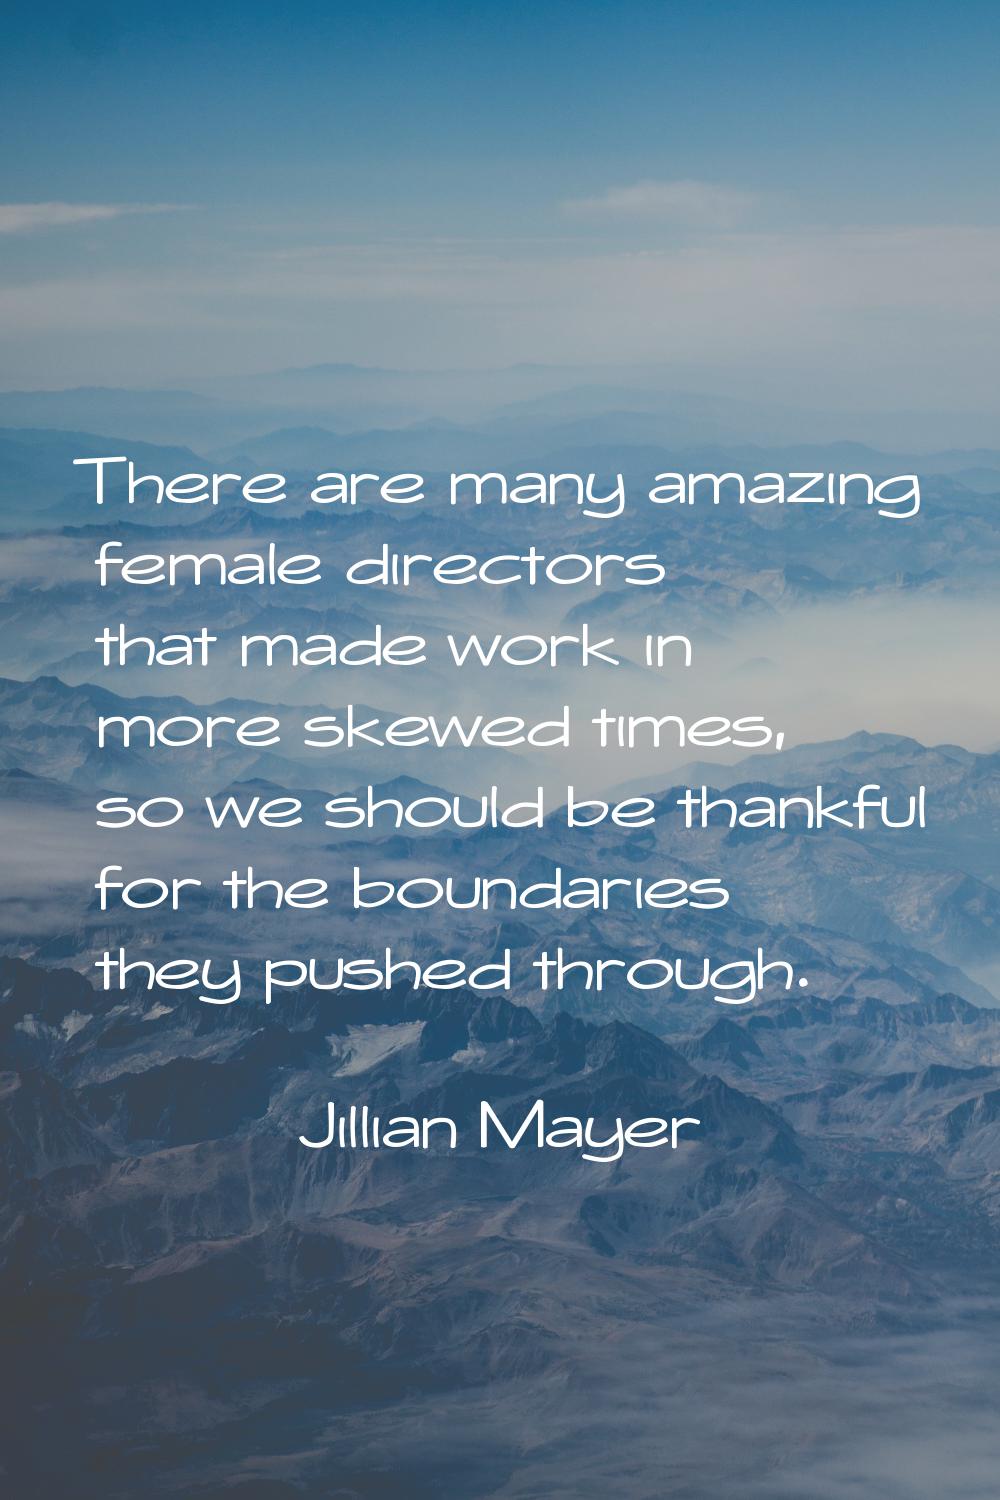 There are many amazing female directors that made work in more skewed times, so we should be thankf